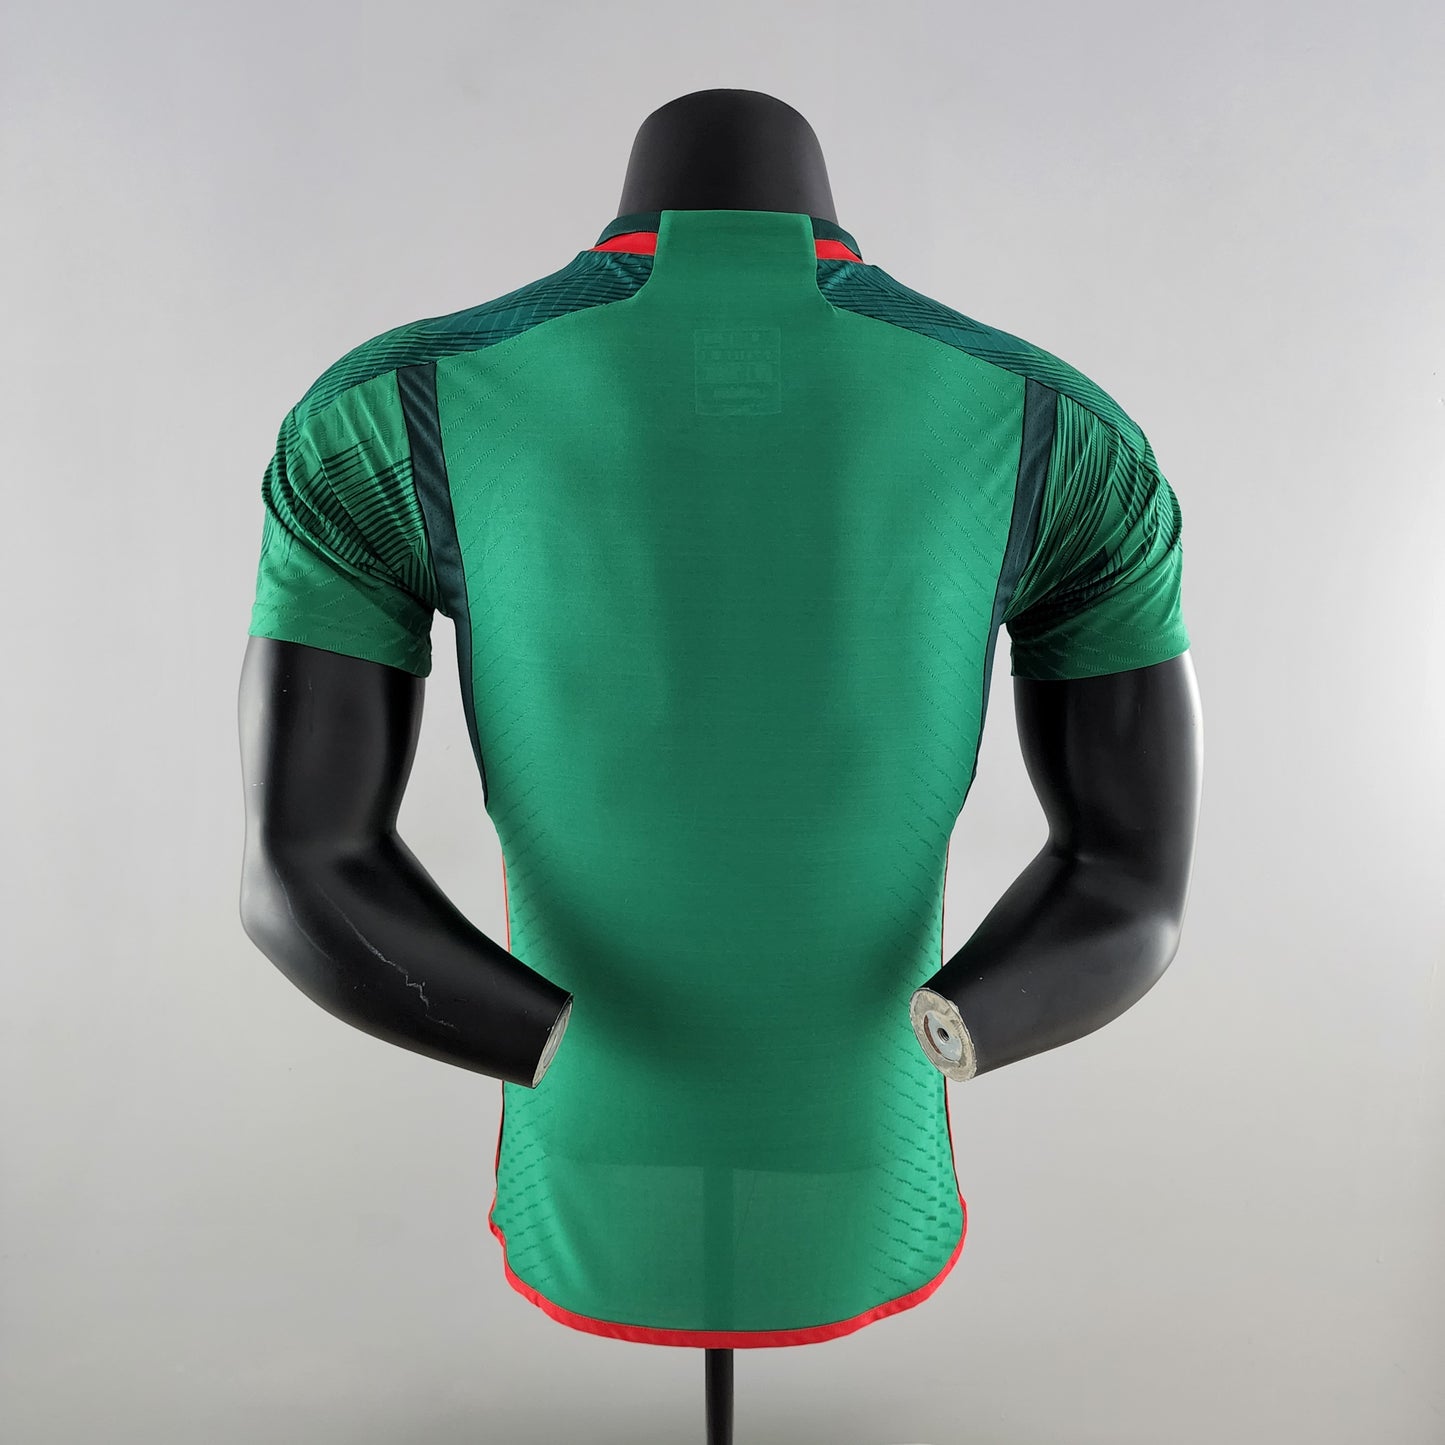 MEXICO 2022 HOME JERSEY